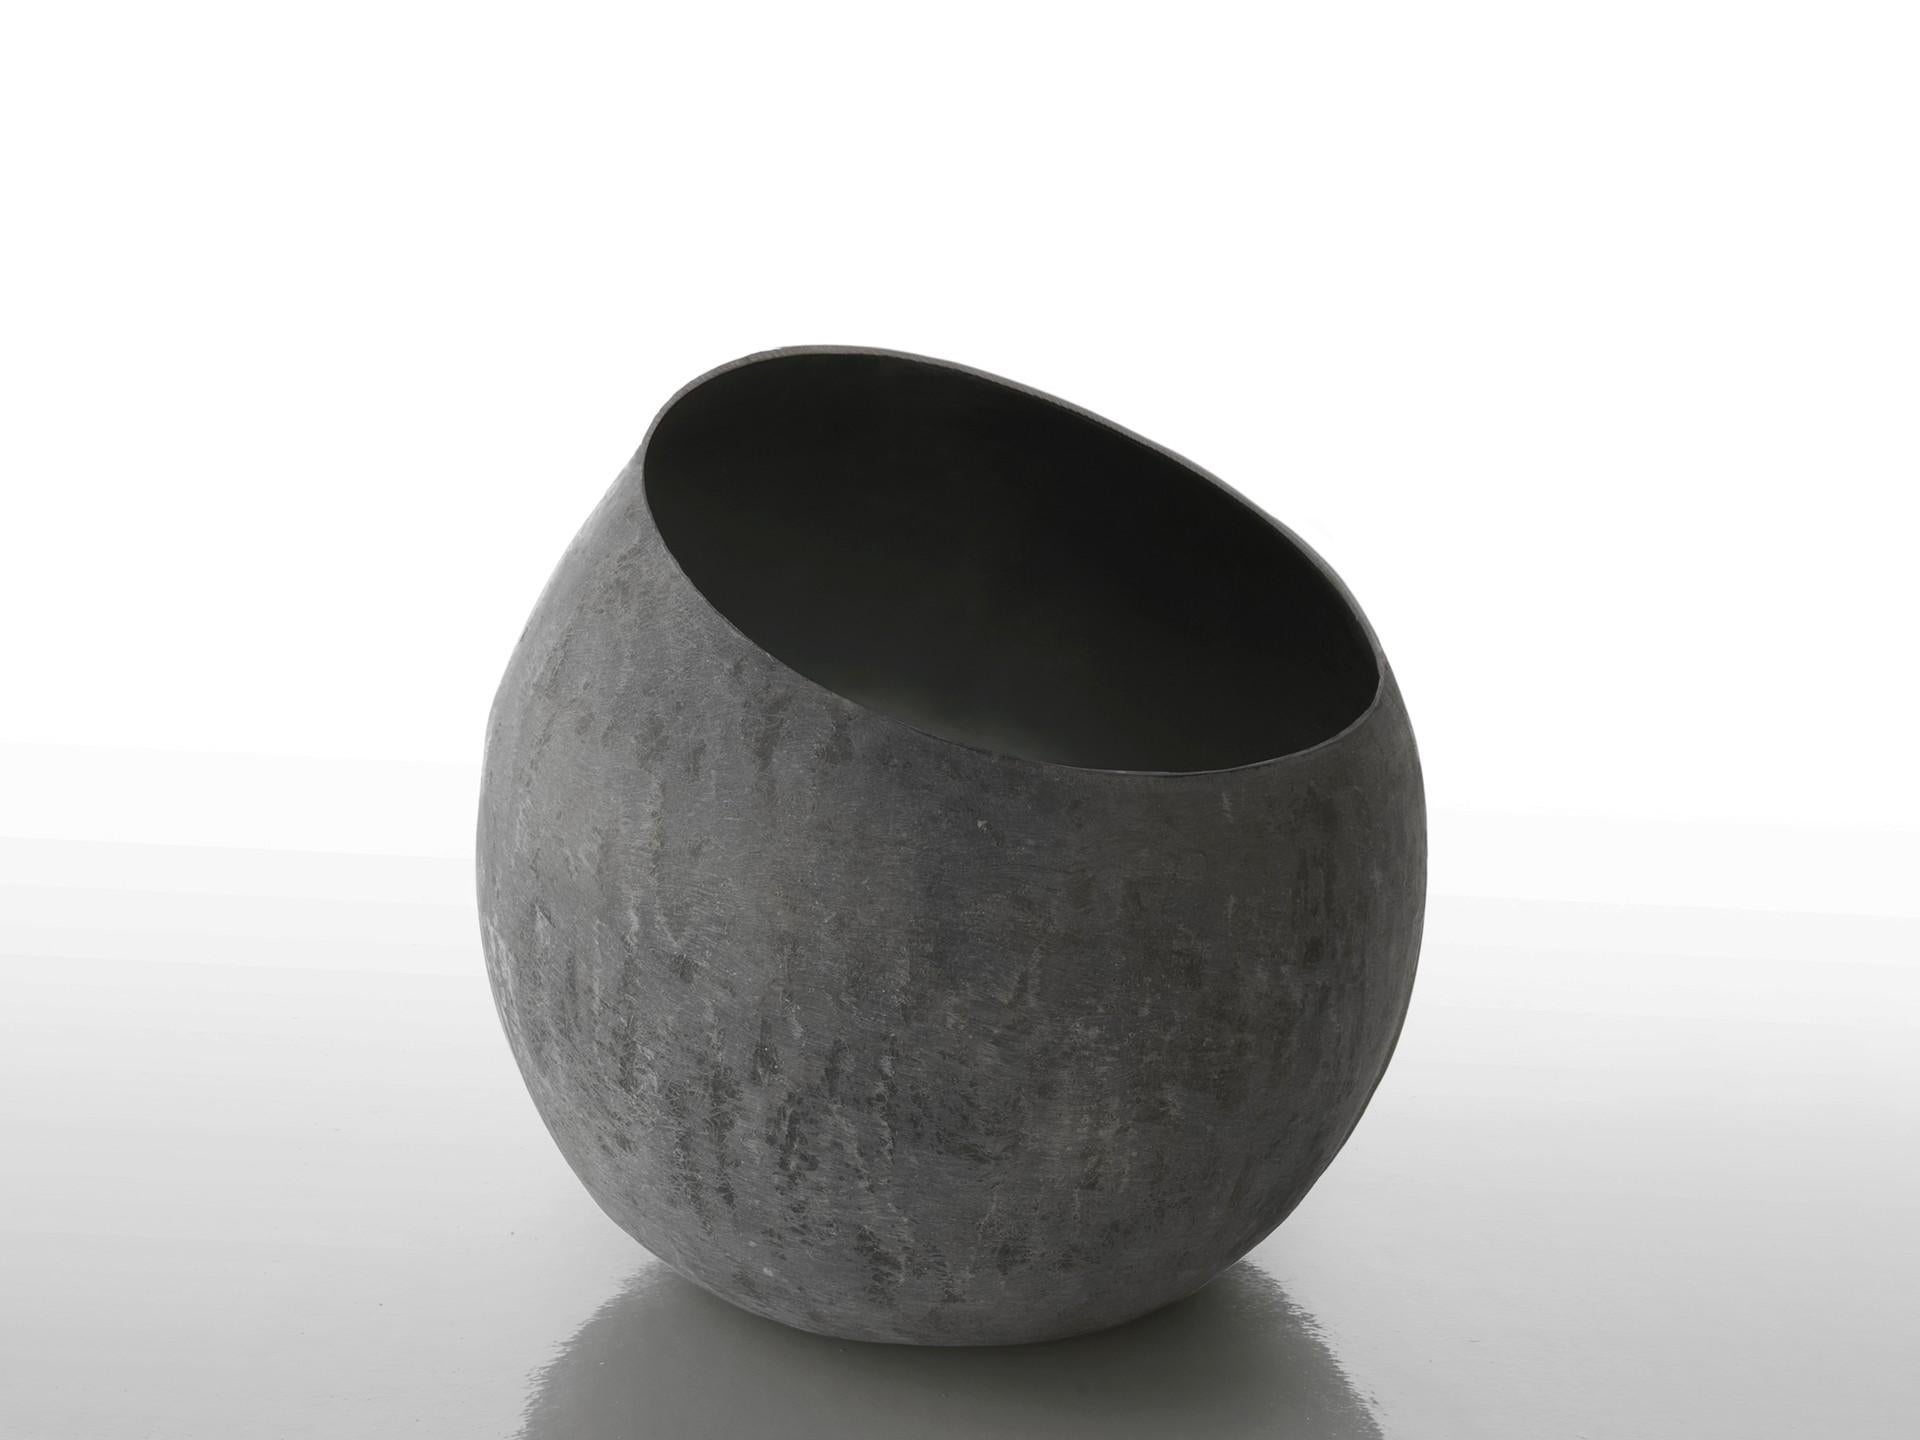 Alma vase by Imperfettolab
Dimensions: Ø 47 x H 44 cm
Materials: Raw material


Imperfetto lab
Who we are ? We are a family.
Verter Turroni, Emanuela Ravelli and our children Elia, Margherita and Eusebio.
All together, we are separate parts